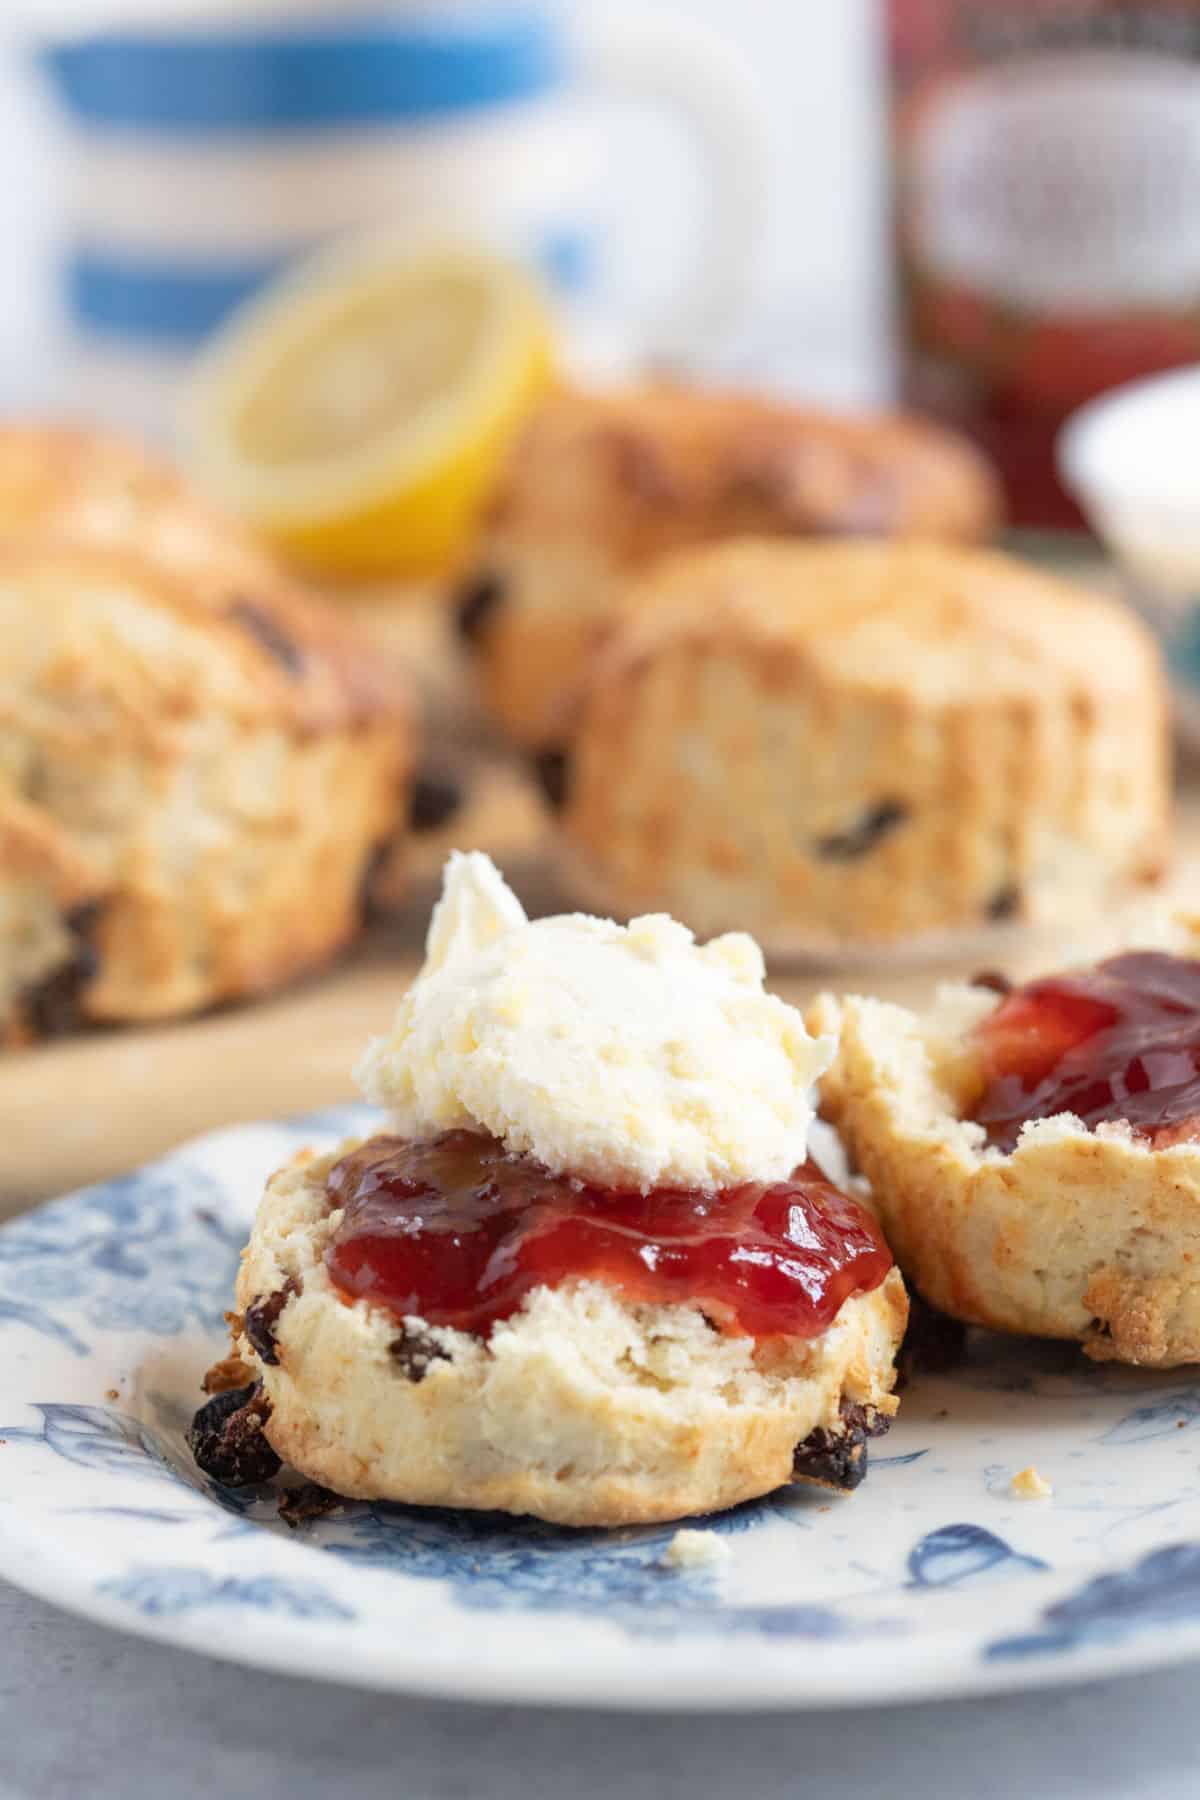 A fruit scone on a blue and white plate topped with jam and clotted cream.